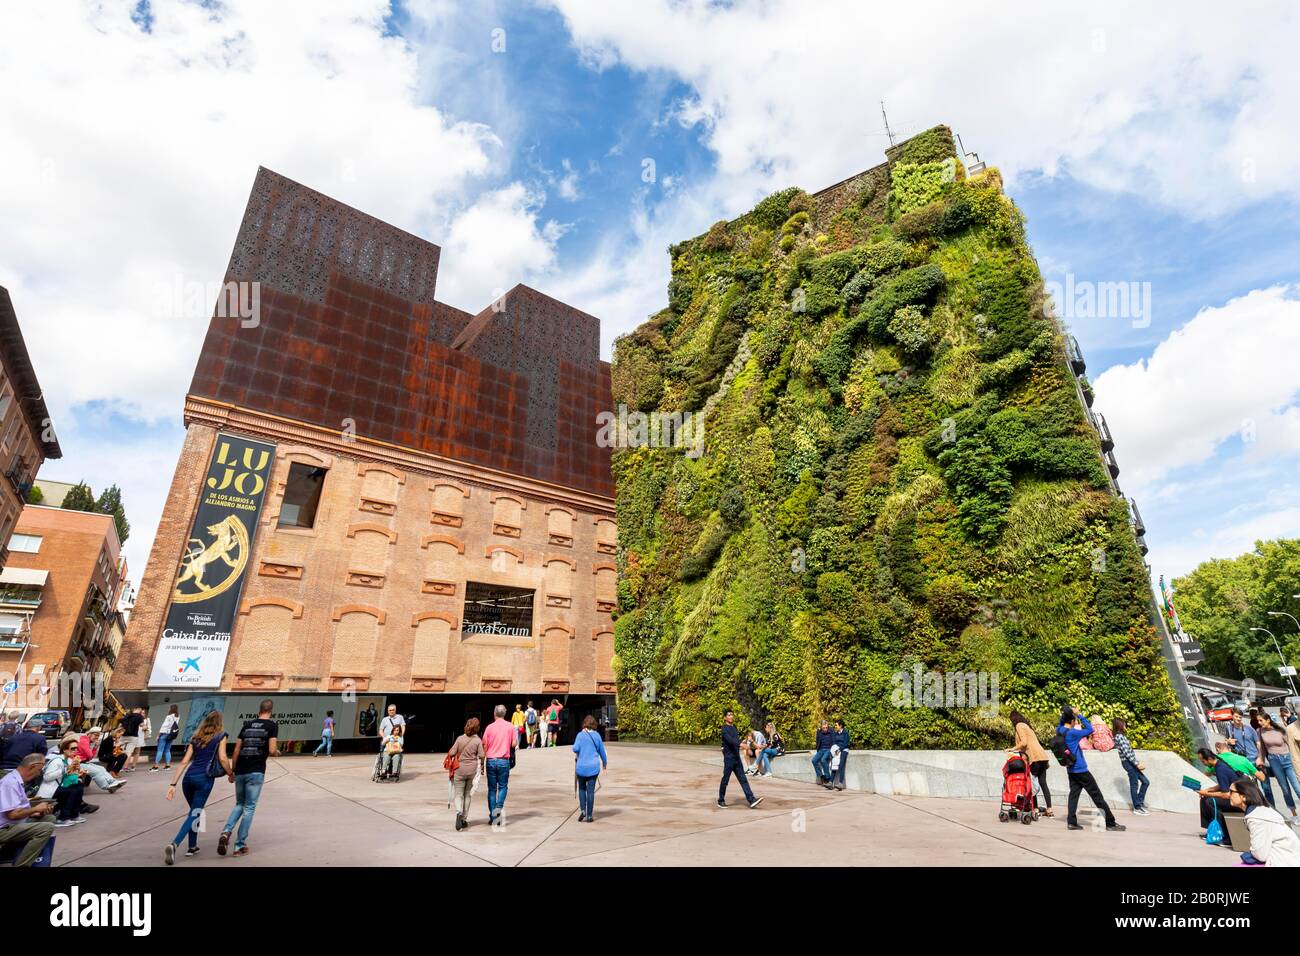 Caixa Forum Museum, by the Herzog & de Meuron architects, with vertical garden by Patrick Blanc, Paseo del Prado, Madrid, Spain Stock Photo